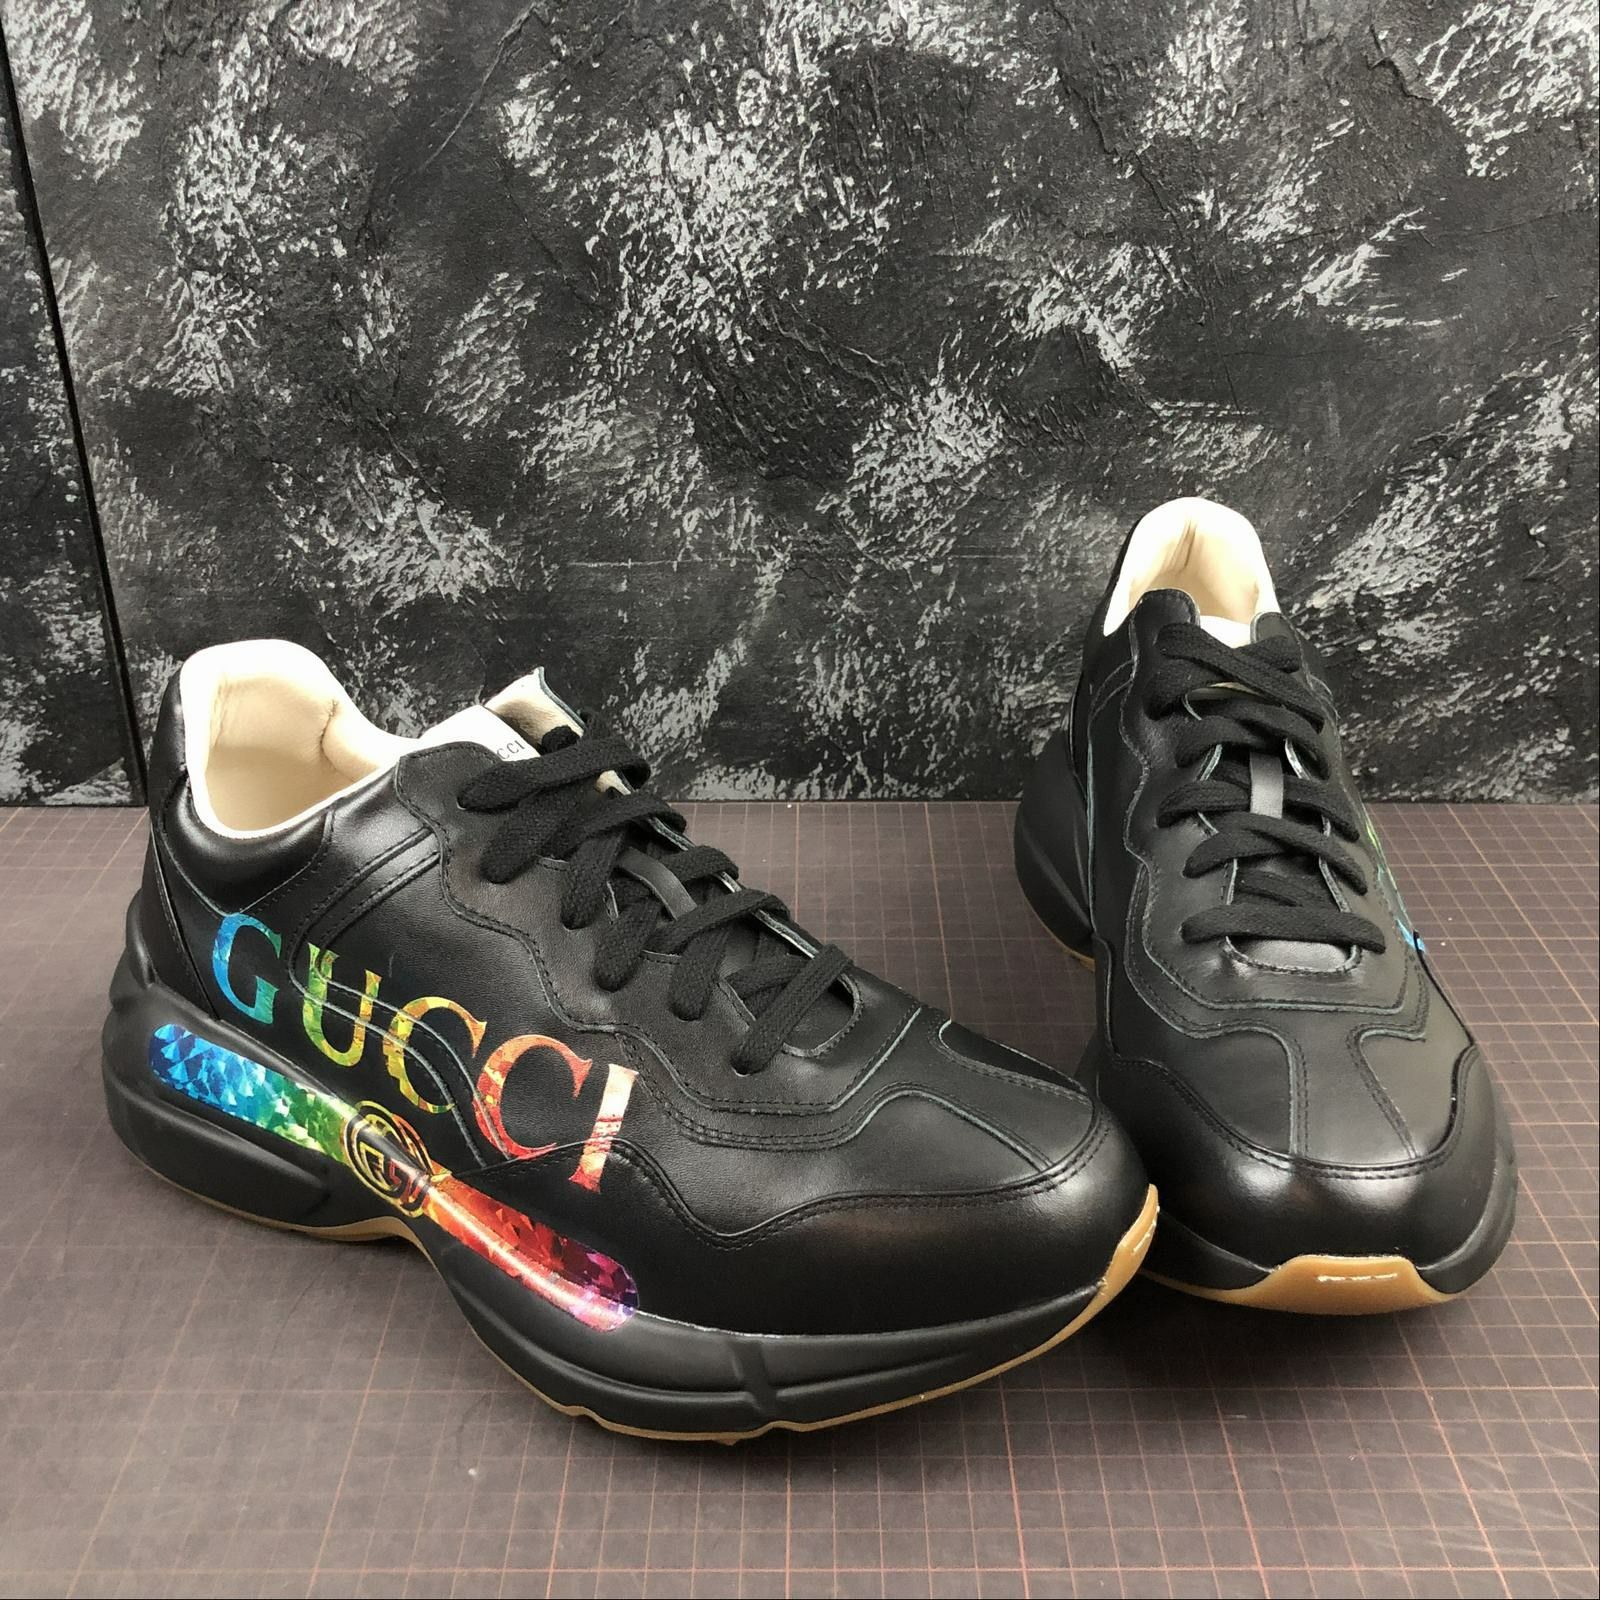 Brand New Rainbow Gucci Shoes ✓